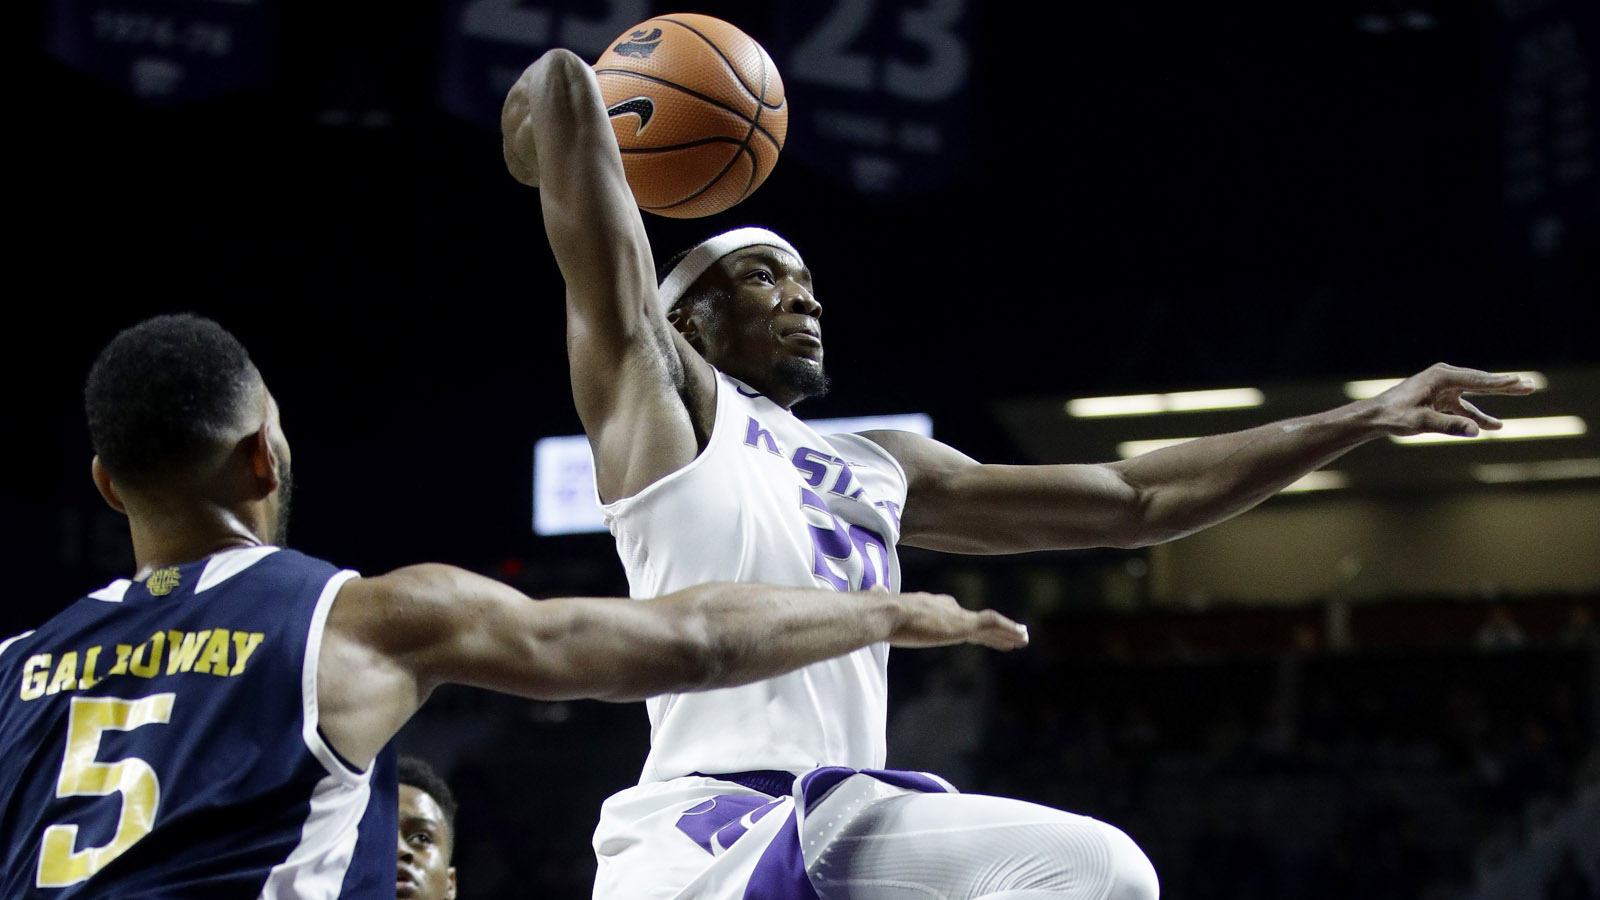 Sneed leads K-State to 84-79 win over Vanderbilt